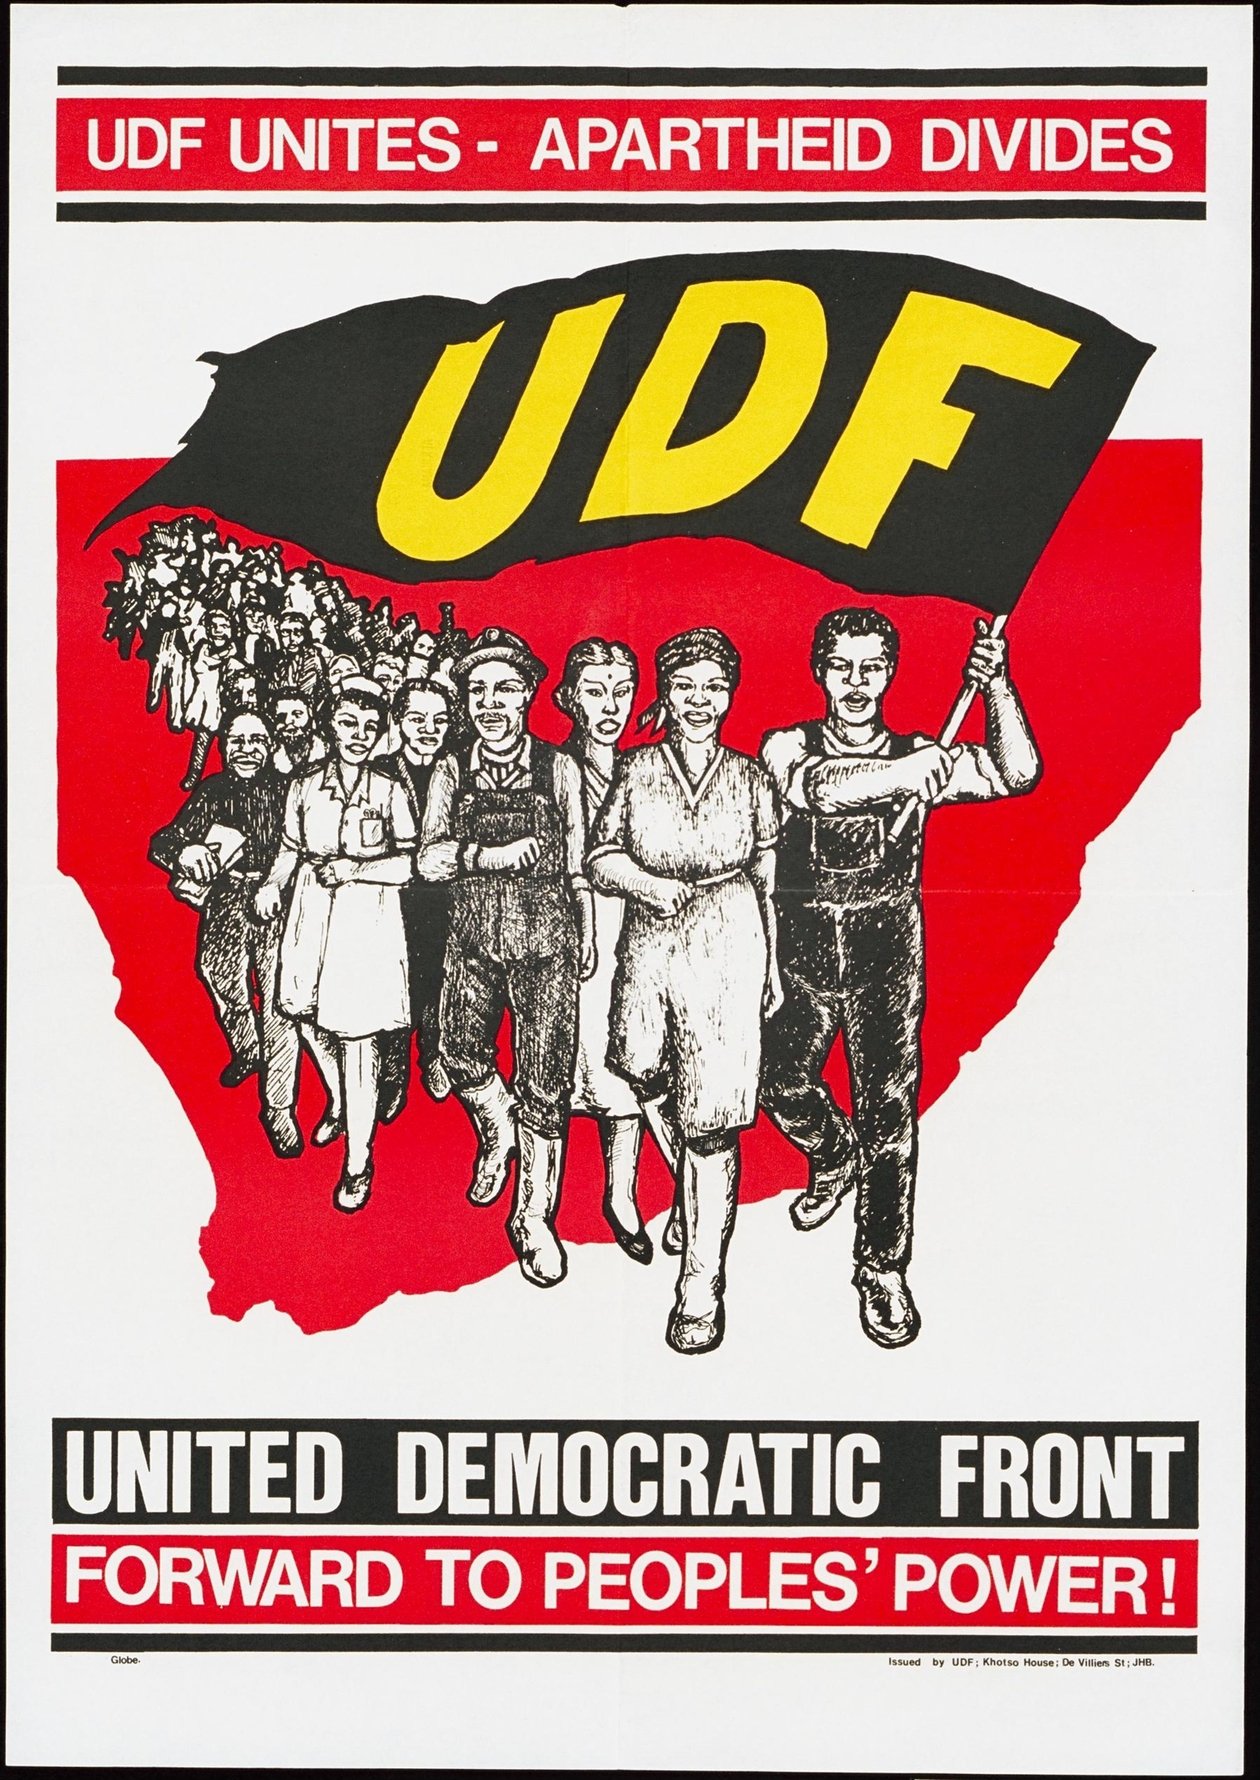 This historic poster was produced for the launch of the UDF in August 1983